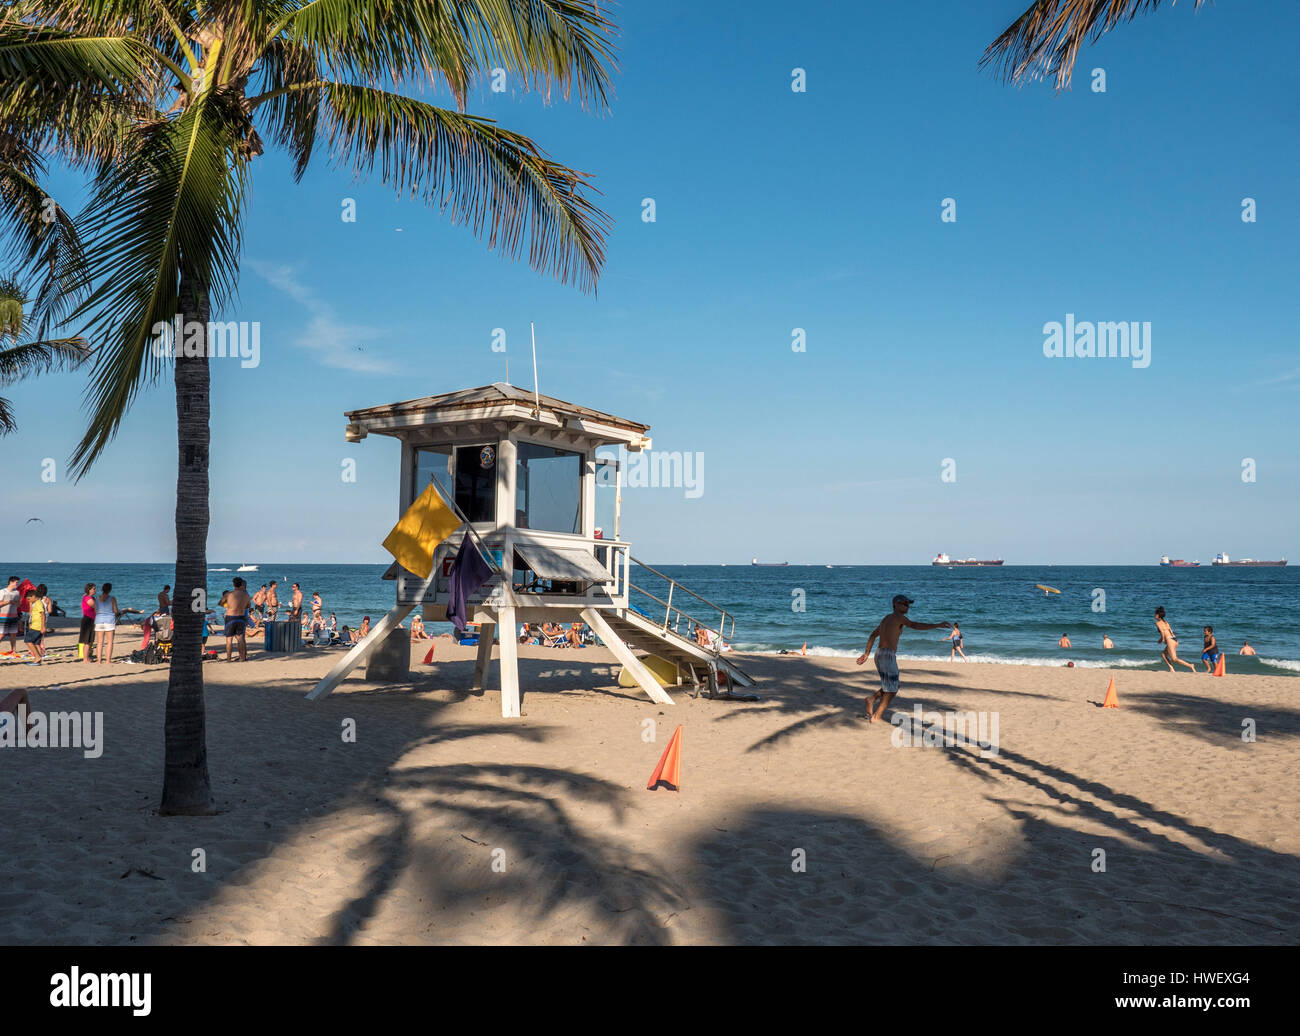 The City Of Fort Lauderdale Ocean Rescue Lifeguard Tower On The Beach At Las Olas, Lifeguards Are On Duty Year Round Stock Photo